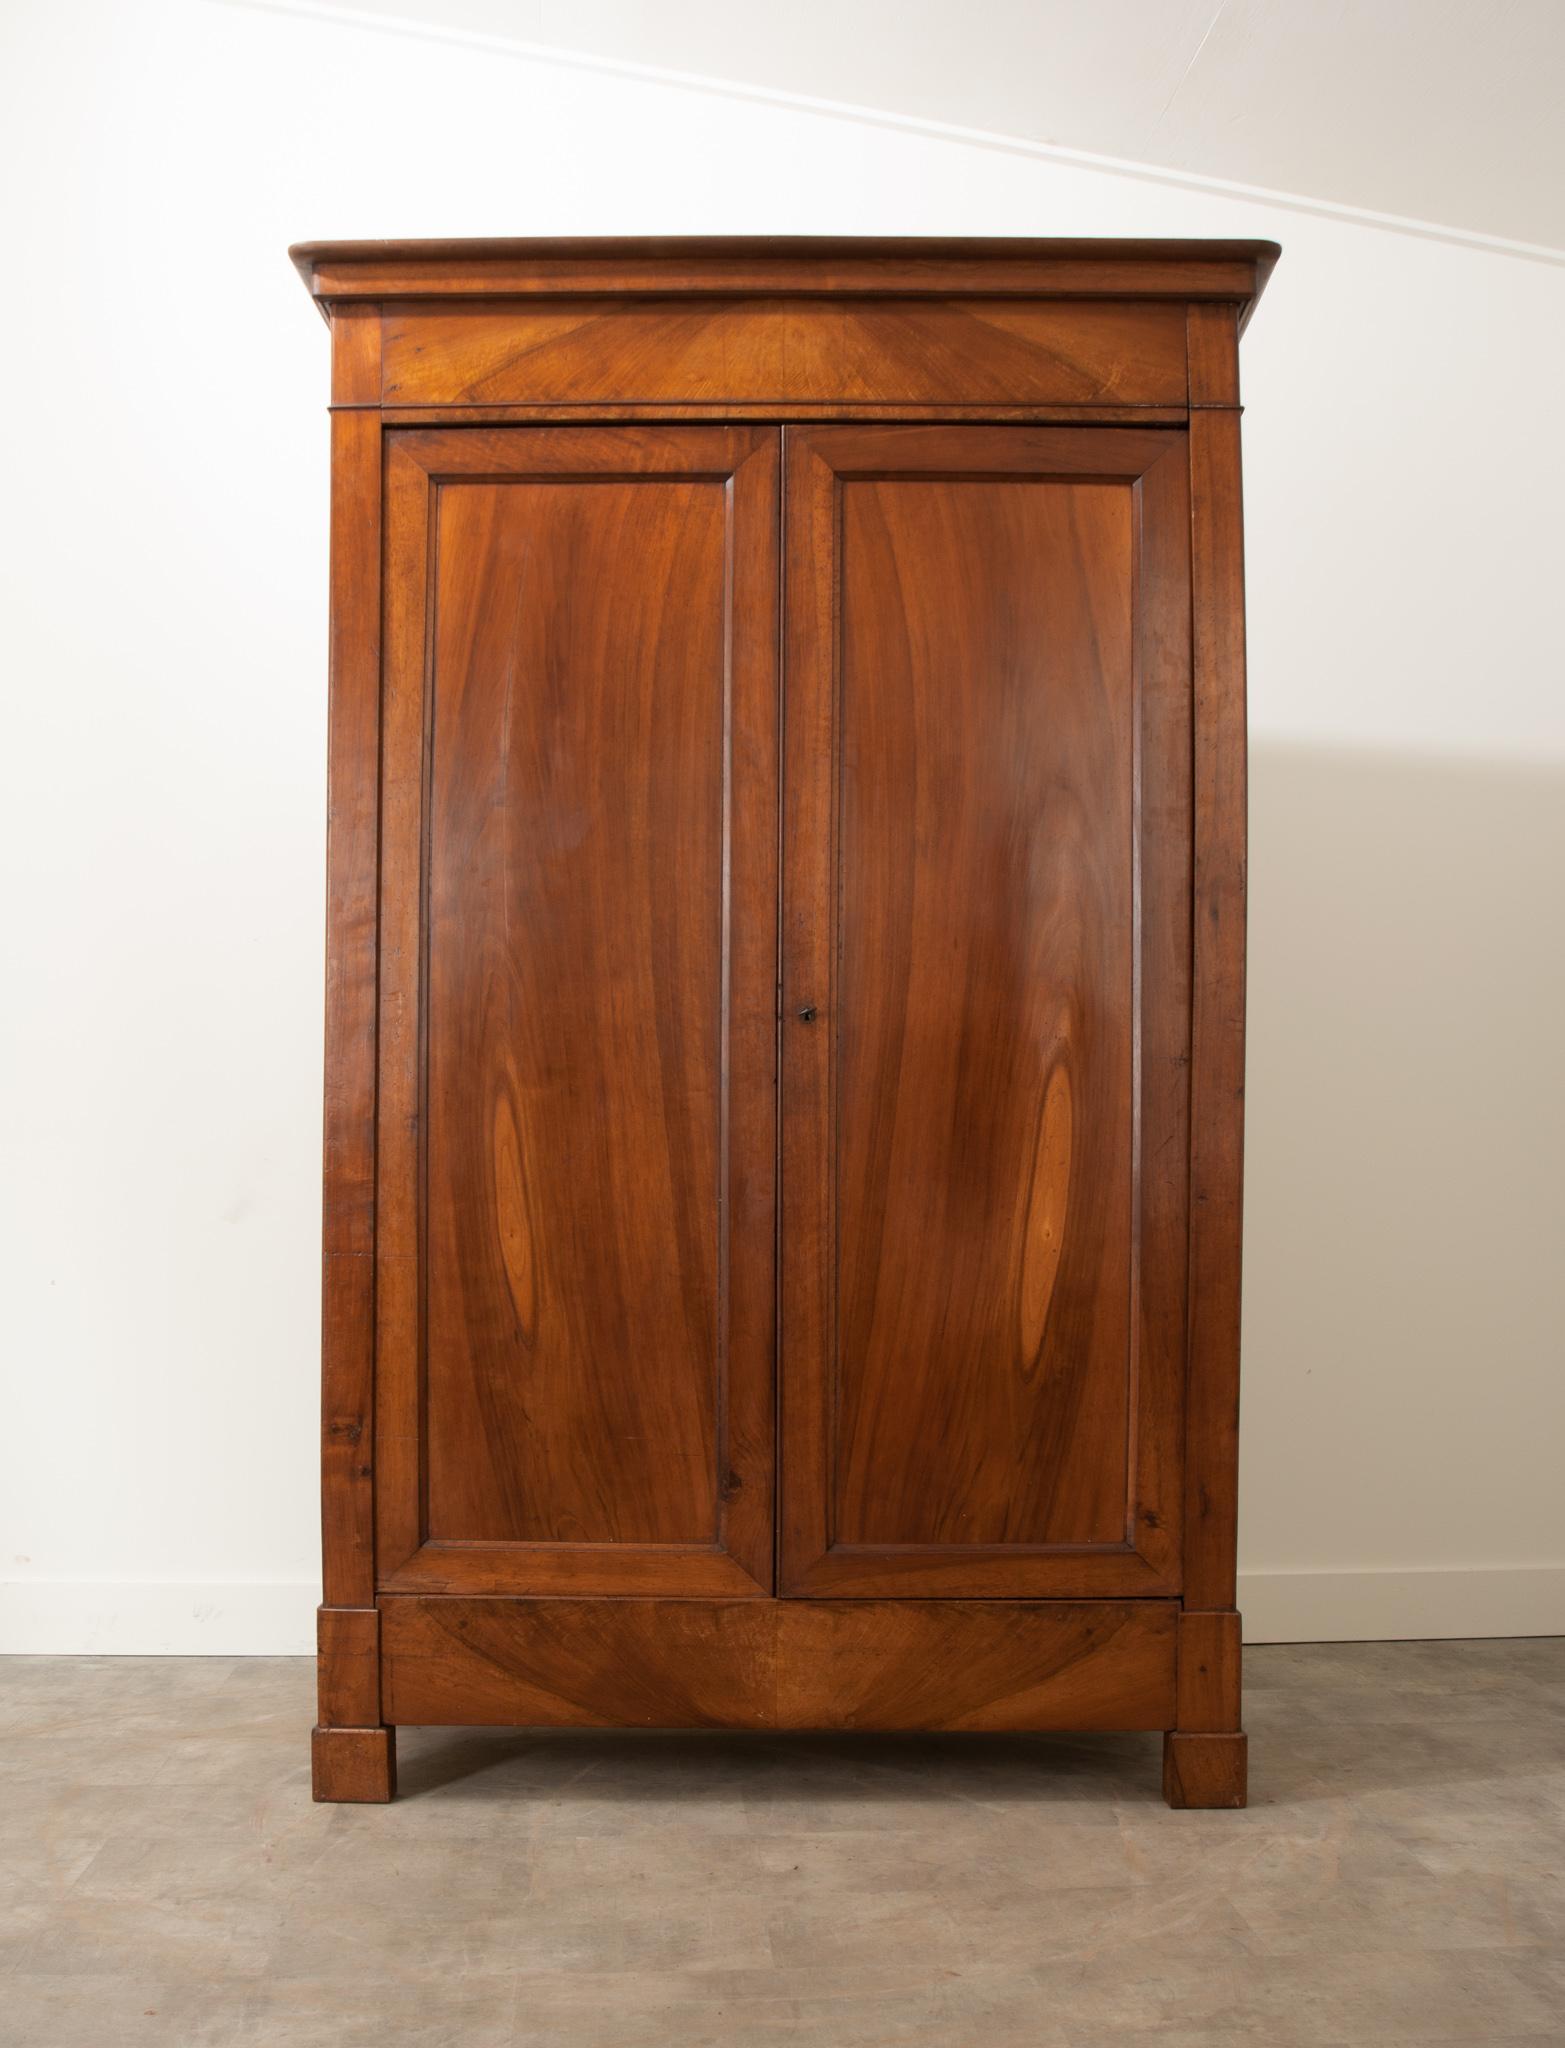 A gorgeous 19th century walnut armoire, made in France in the Louis Philippe style. This tall case antique has a simple, linear composition - an attribute that makes Louis Philippe pieces ideal for their versatility and placement possibilities. They